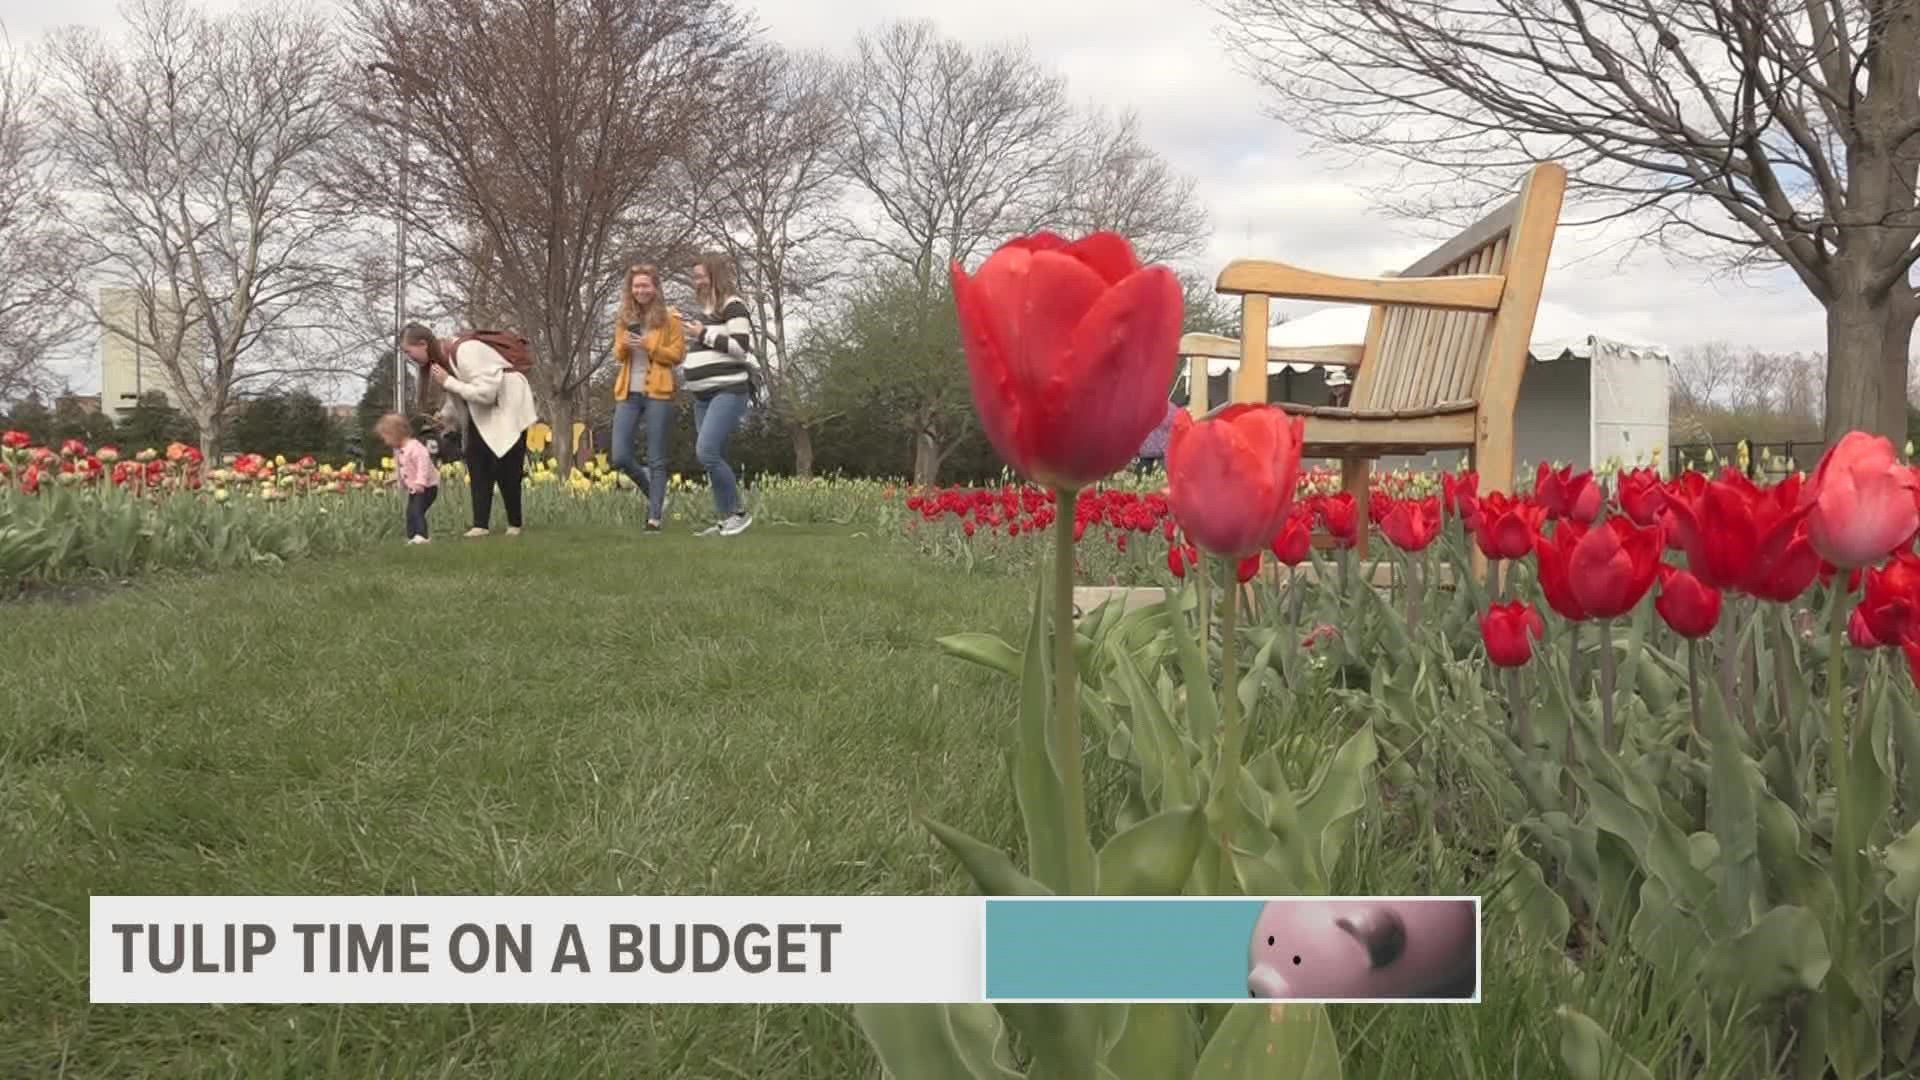 Some Tulip Time events require a ticket, but today we’re showing you how to enjoy the festival on a budget.